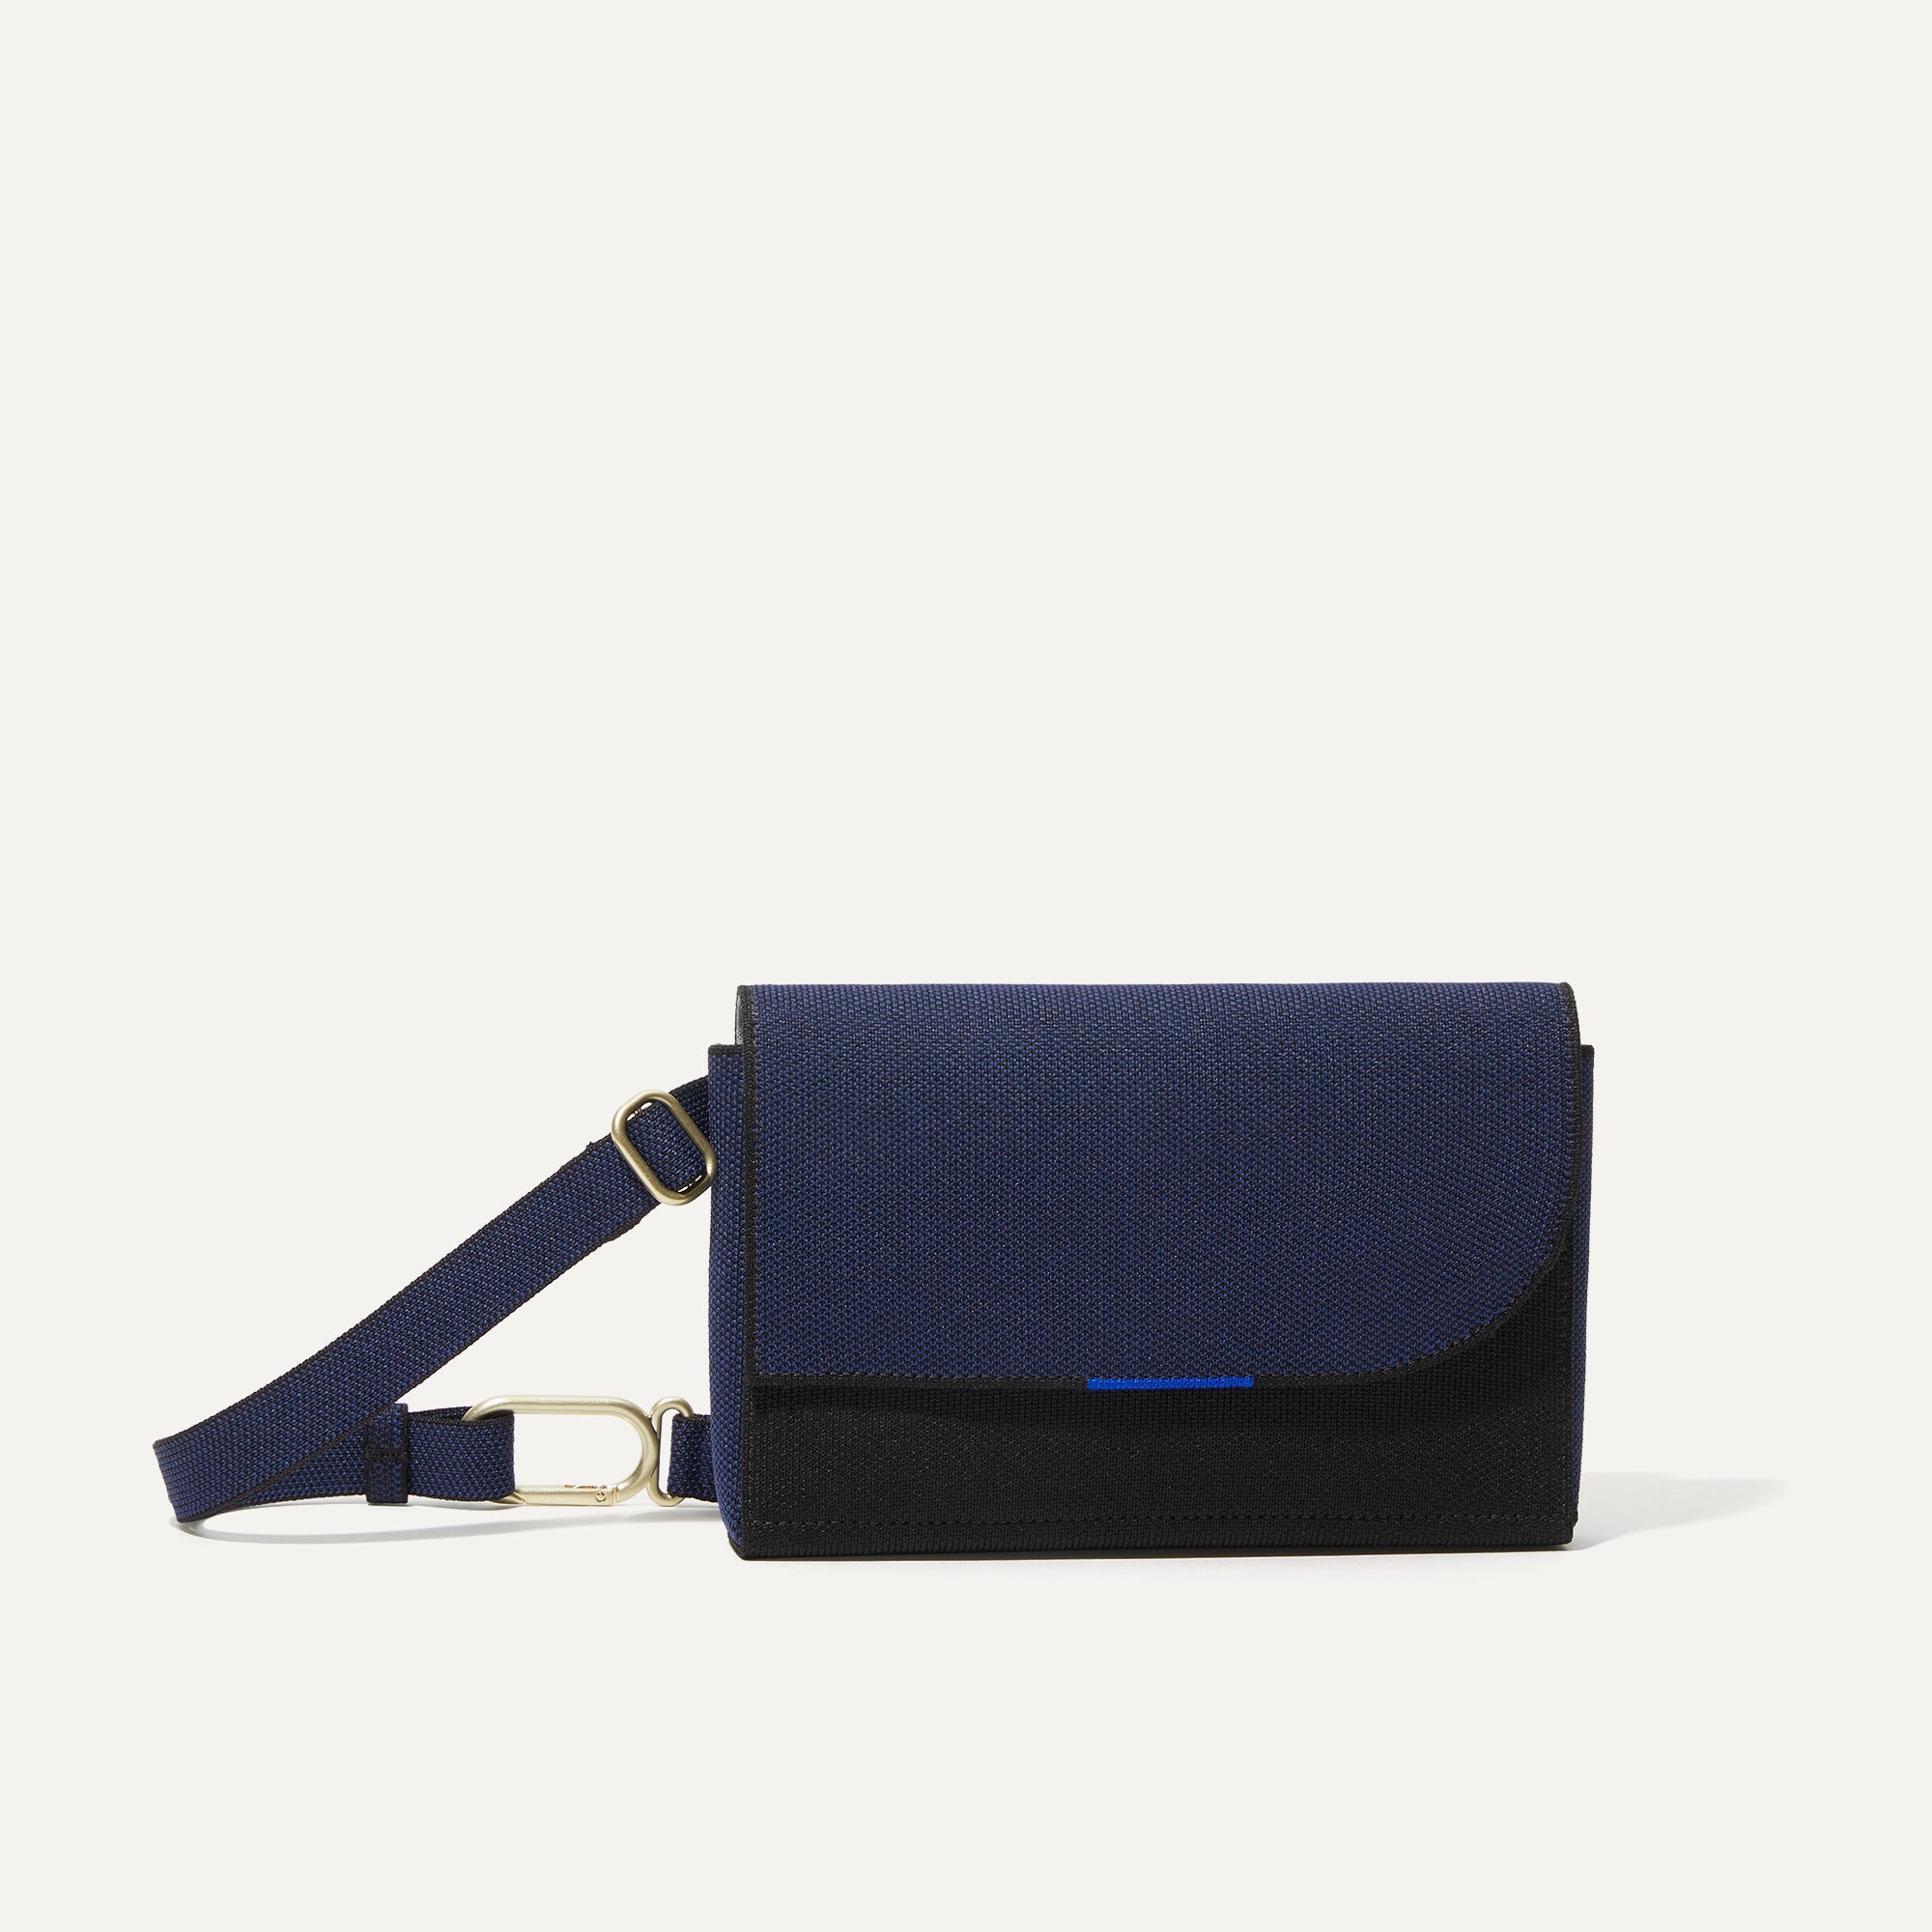 Rothy's - The Belt Bag in Blue/Neutral